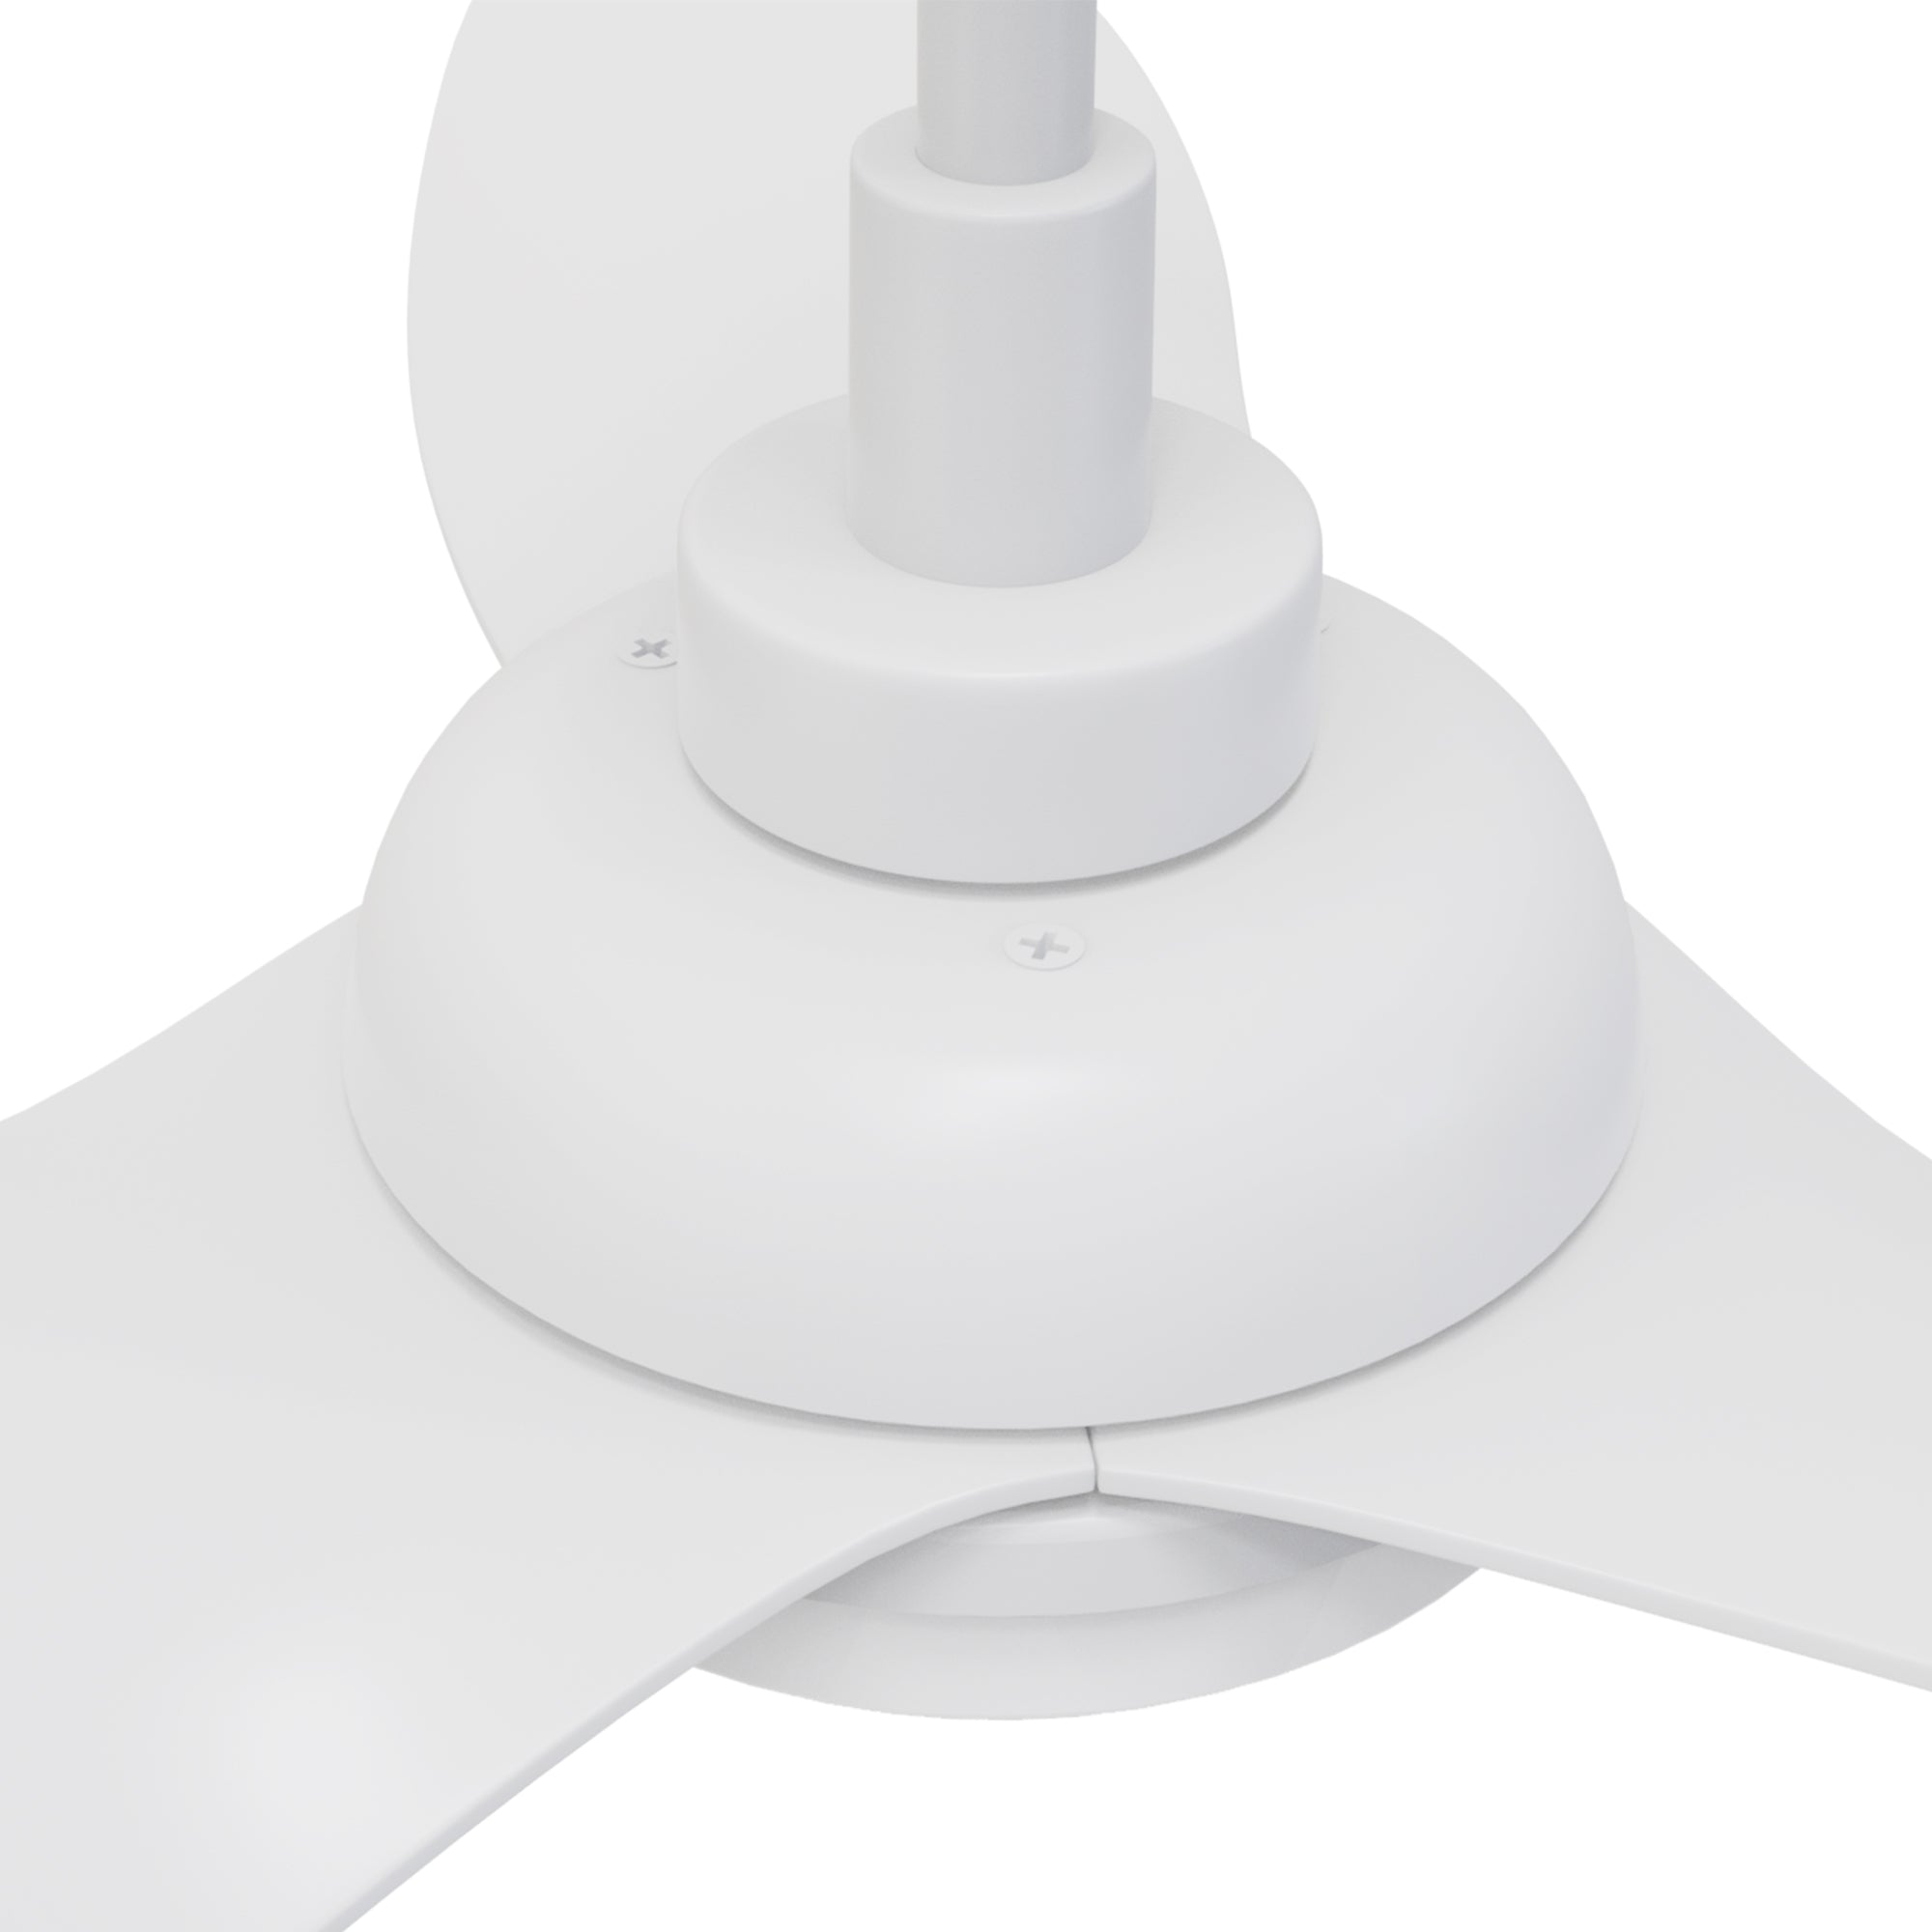 The Smafan 45'' Daisy Smart Ceiling Fan with 3 blades and a 45-inch blade sweep with a swift modern appearance. Its compact size is perfect for smaller bedrooms. It is made of a strong and durable ABS material in an all white finish. The 4k LED light kit is dimmable and can change between bright white and warm soft light temperatures. The fan features Remote control, Wi-Fi apps, Siri Shortcut and Voice control technology (compatible with Amazon Alexa and Google Home Assistant ) to set fan preferences.